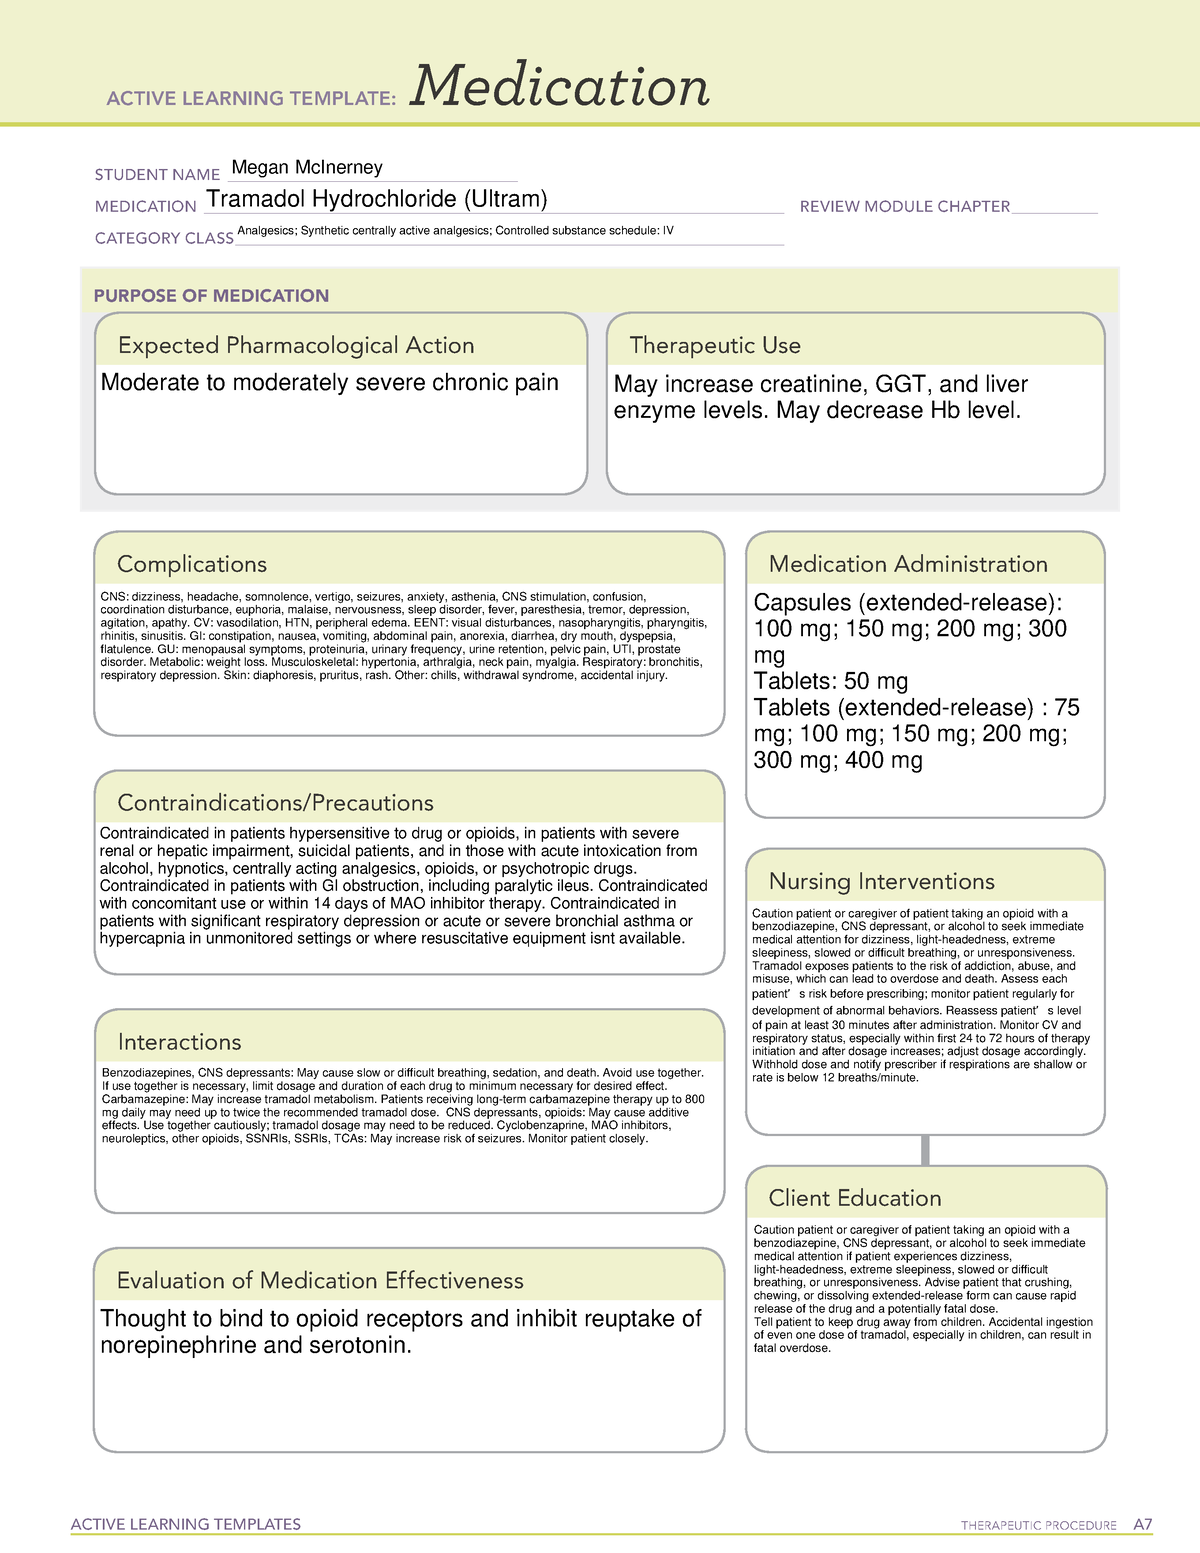 Tramadol Medication Card Wk 2 ACTIVE LEARNING TEMPLATES THERAPEUTIC PROCEDURE A Medication